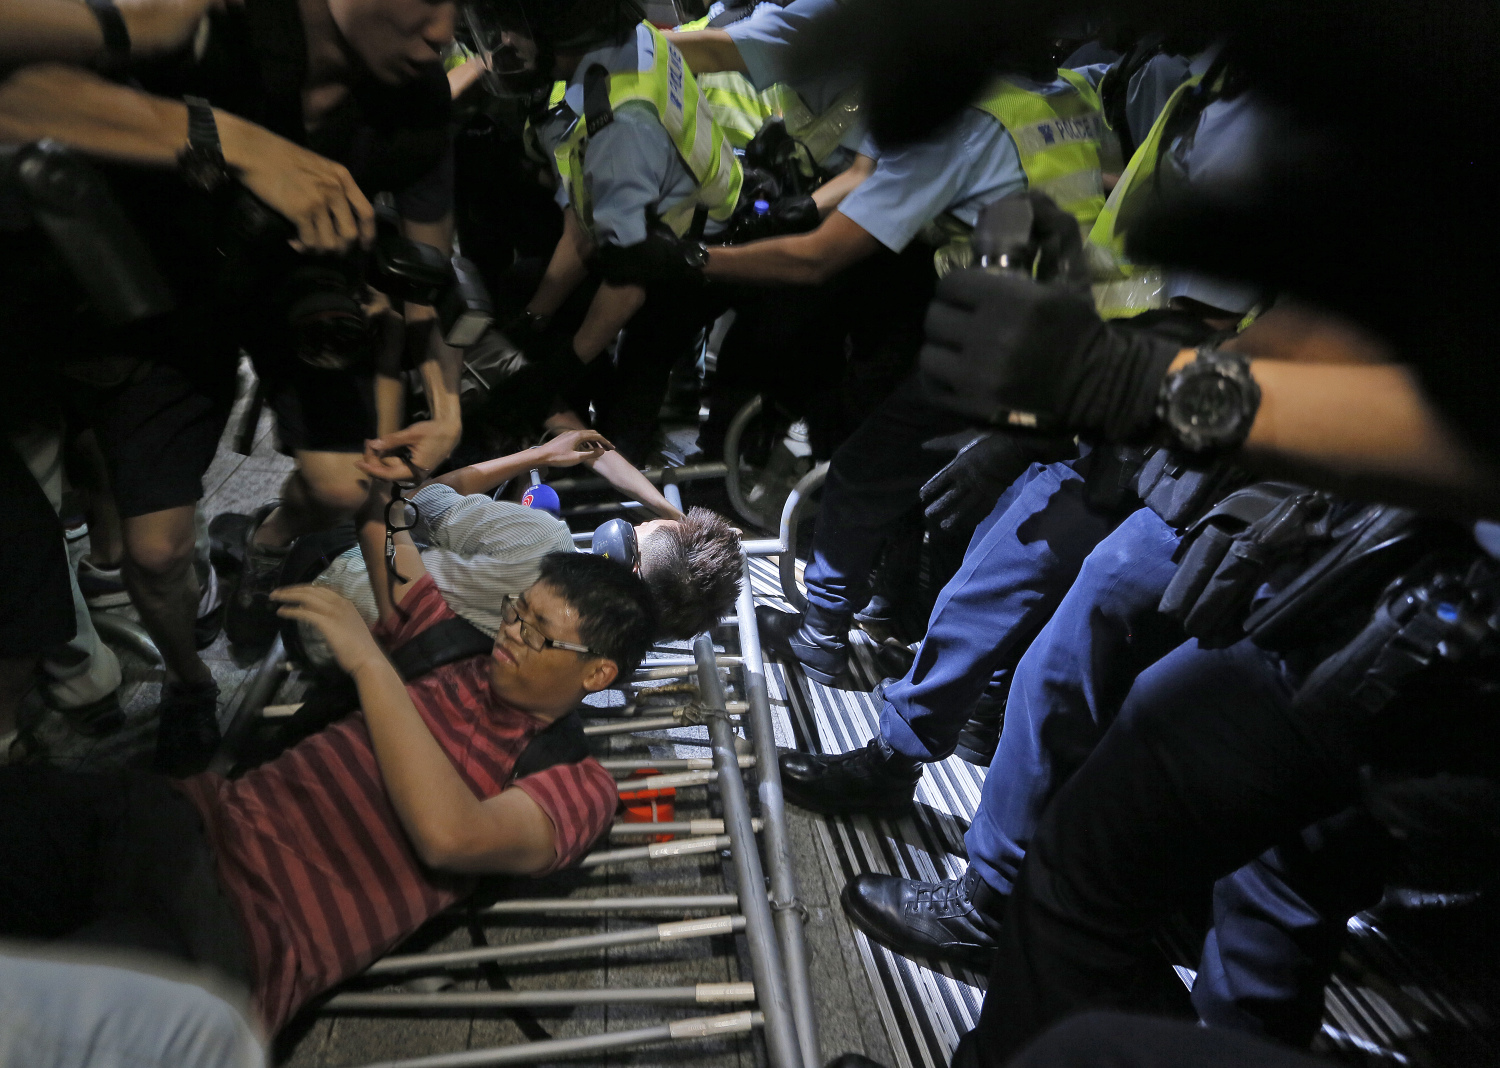 Protesters against new town development in the New Territories clash with police outside the Legislative Council building earlier this month. Photo: AP